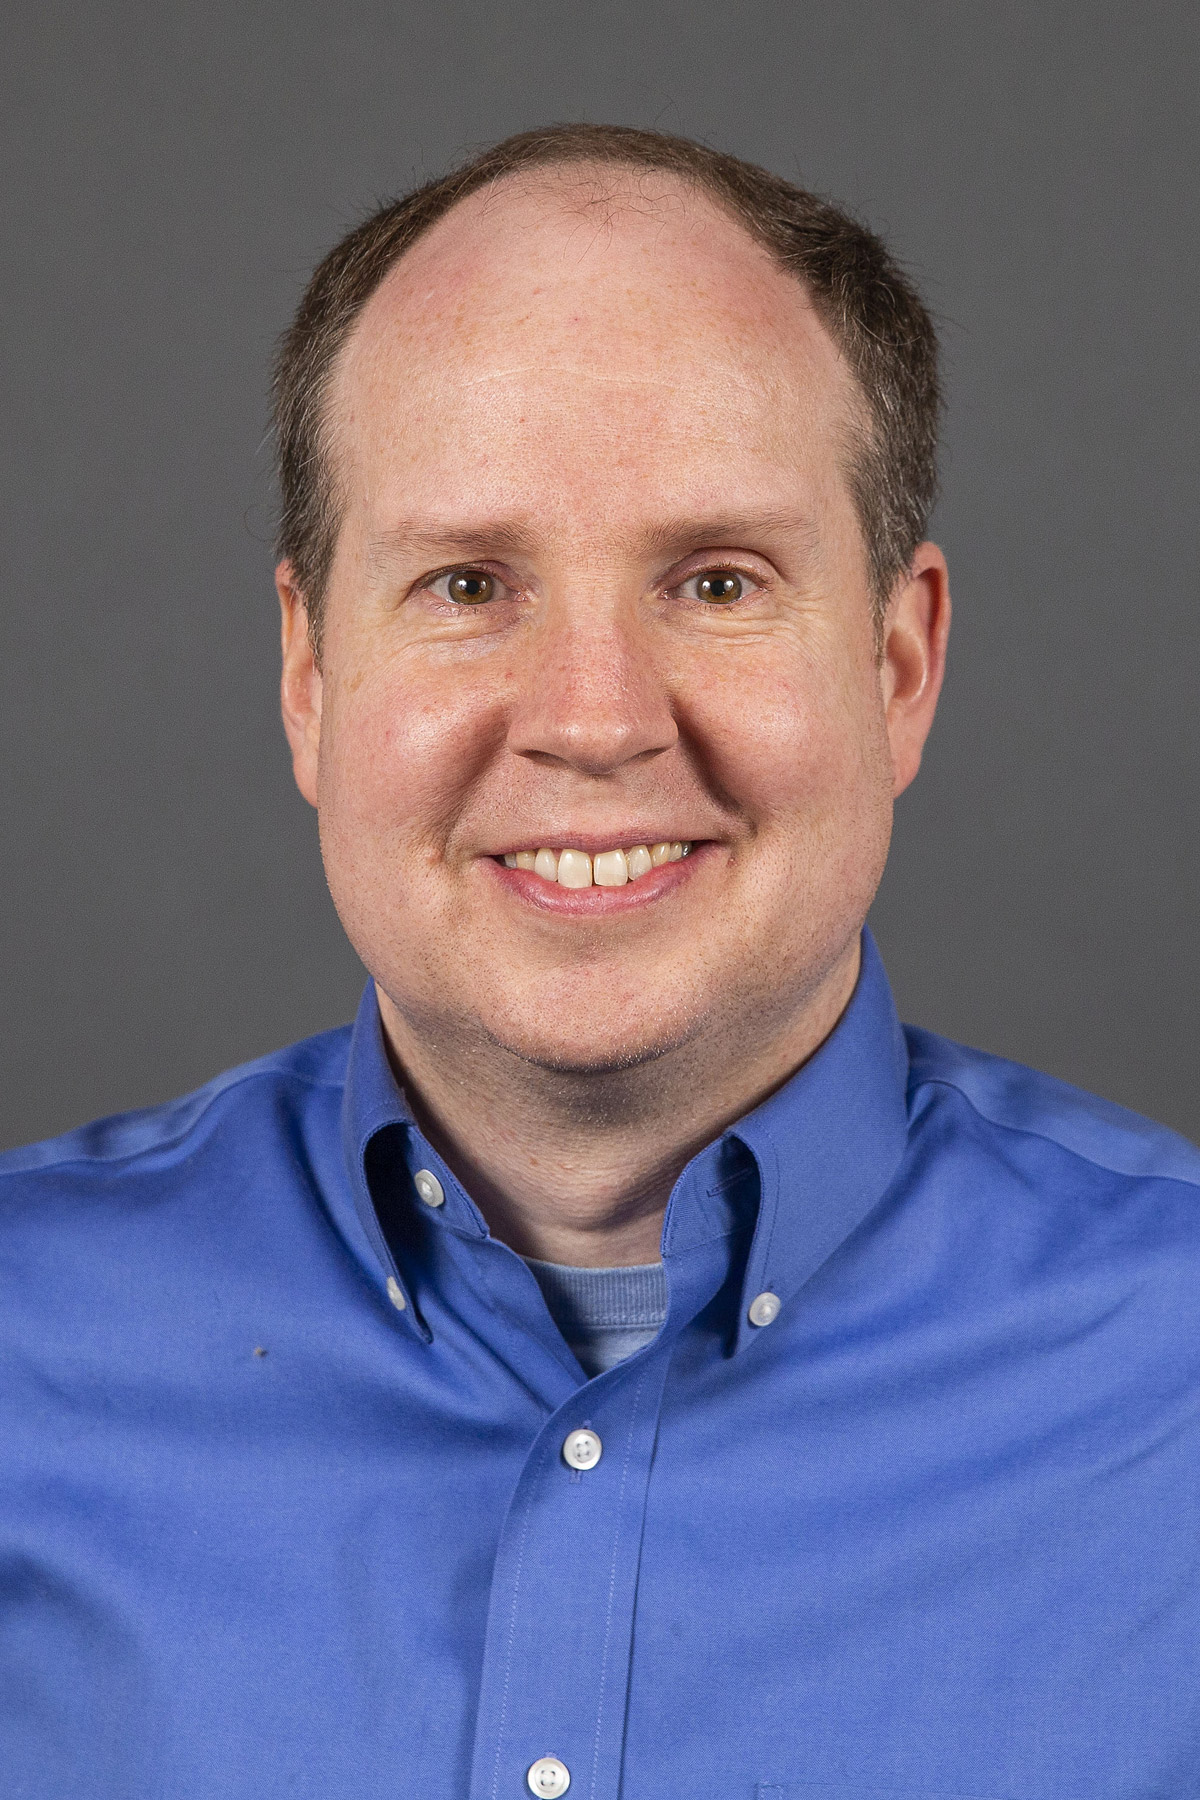 Man in blue collared shirt smiling - Pictured: Brian Daly